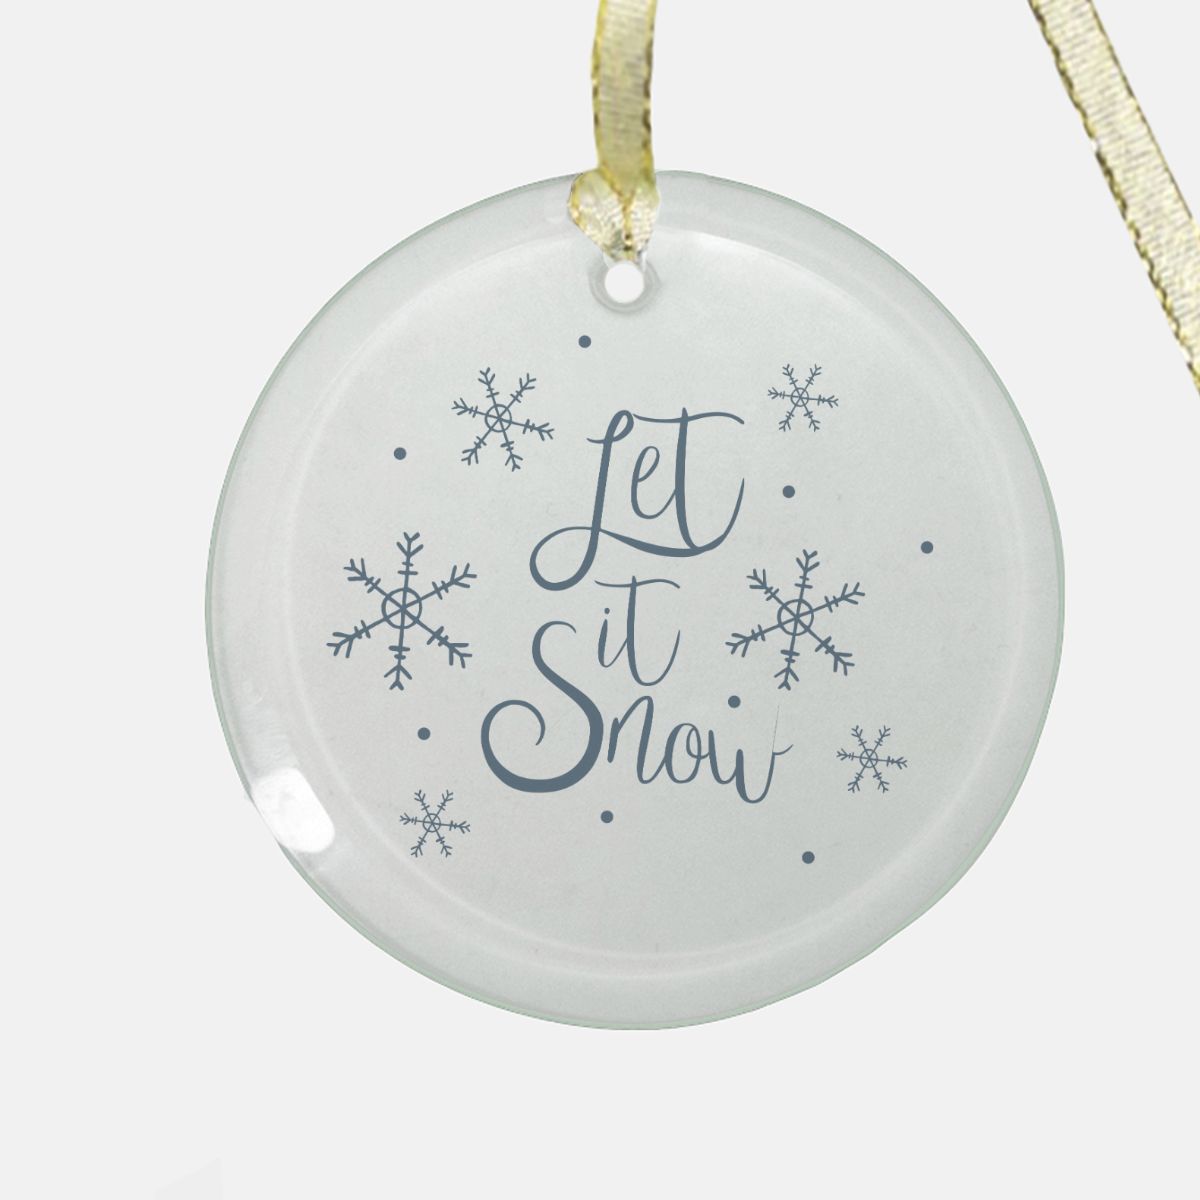 Round Clear Glass Holiday Ornament - Let it Snow